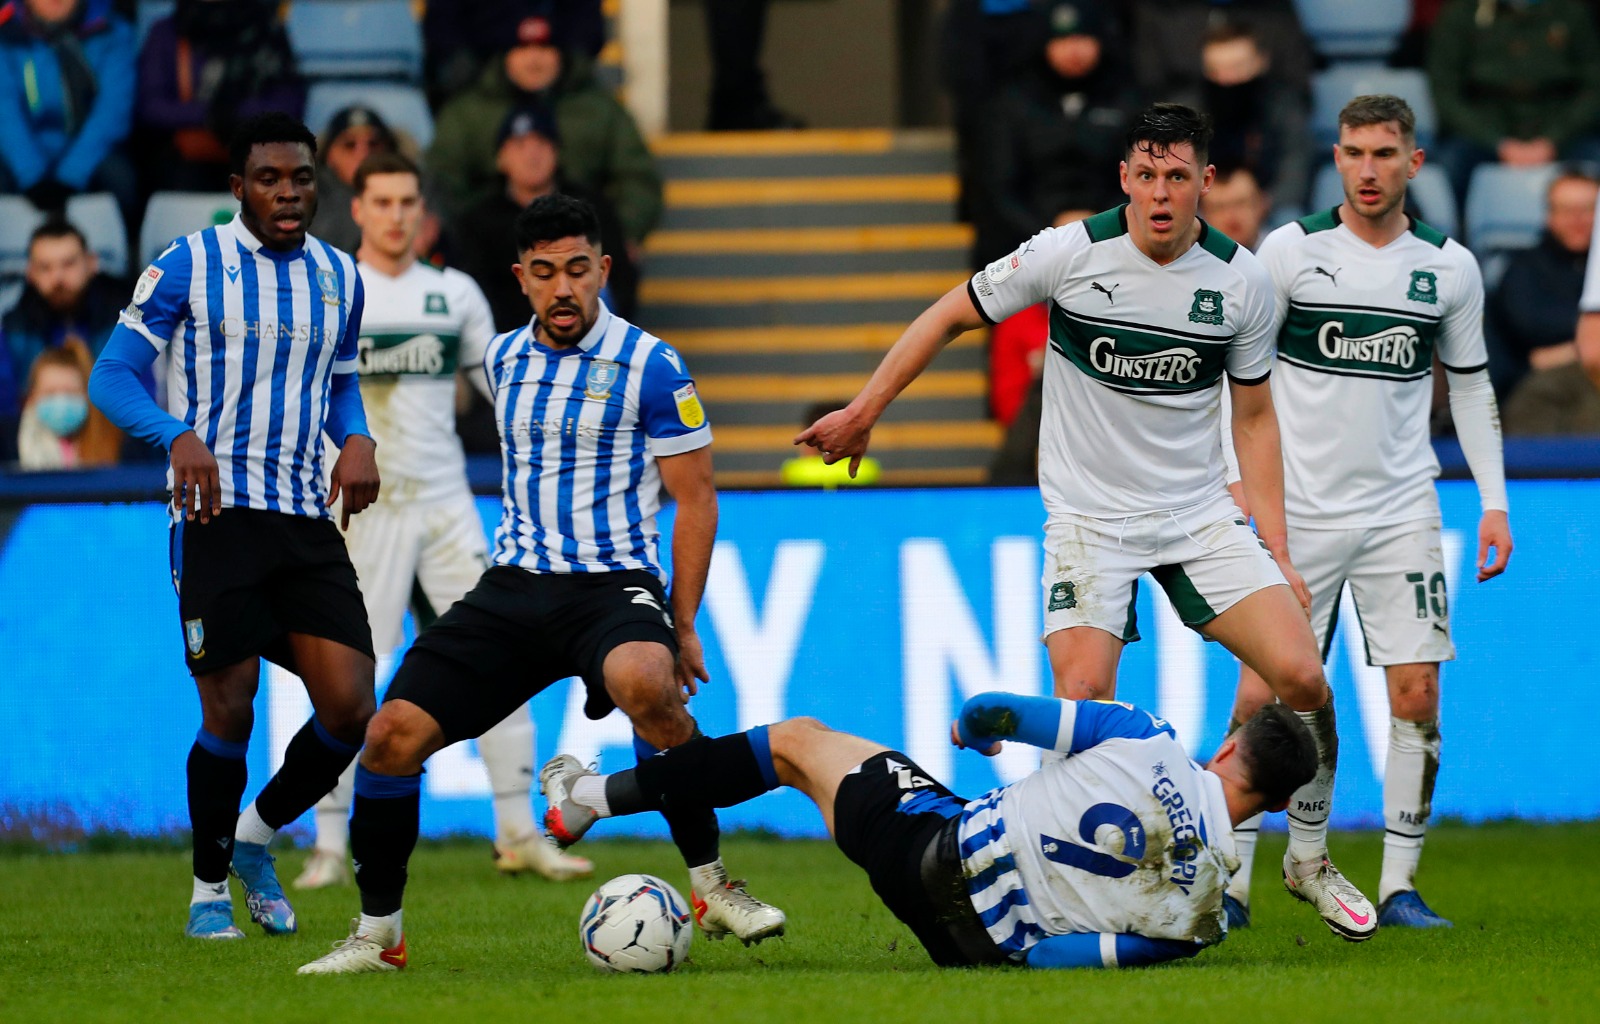 Greens go down to defeat at Sheffield Wednesday